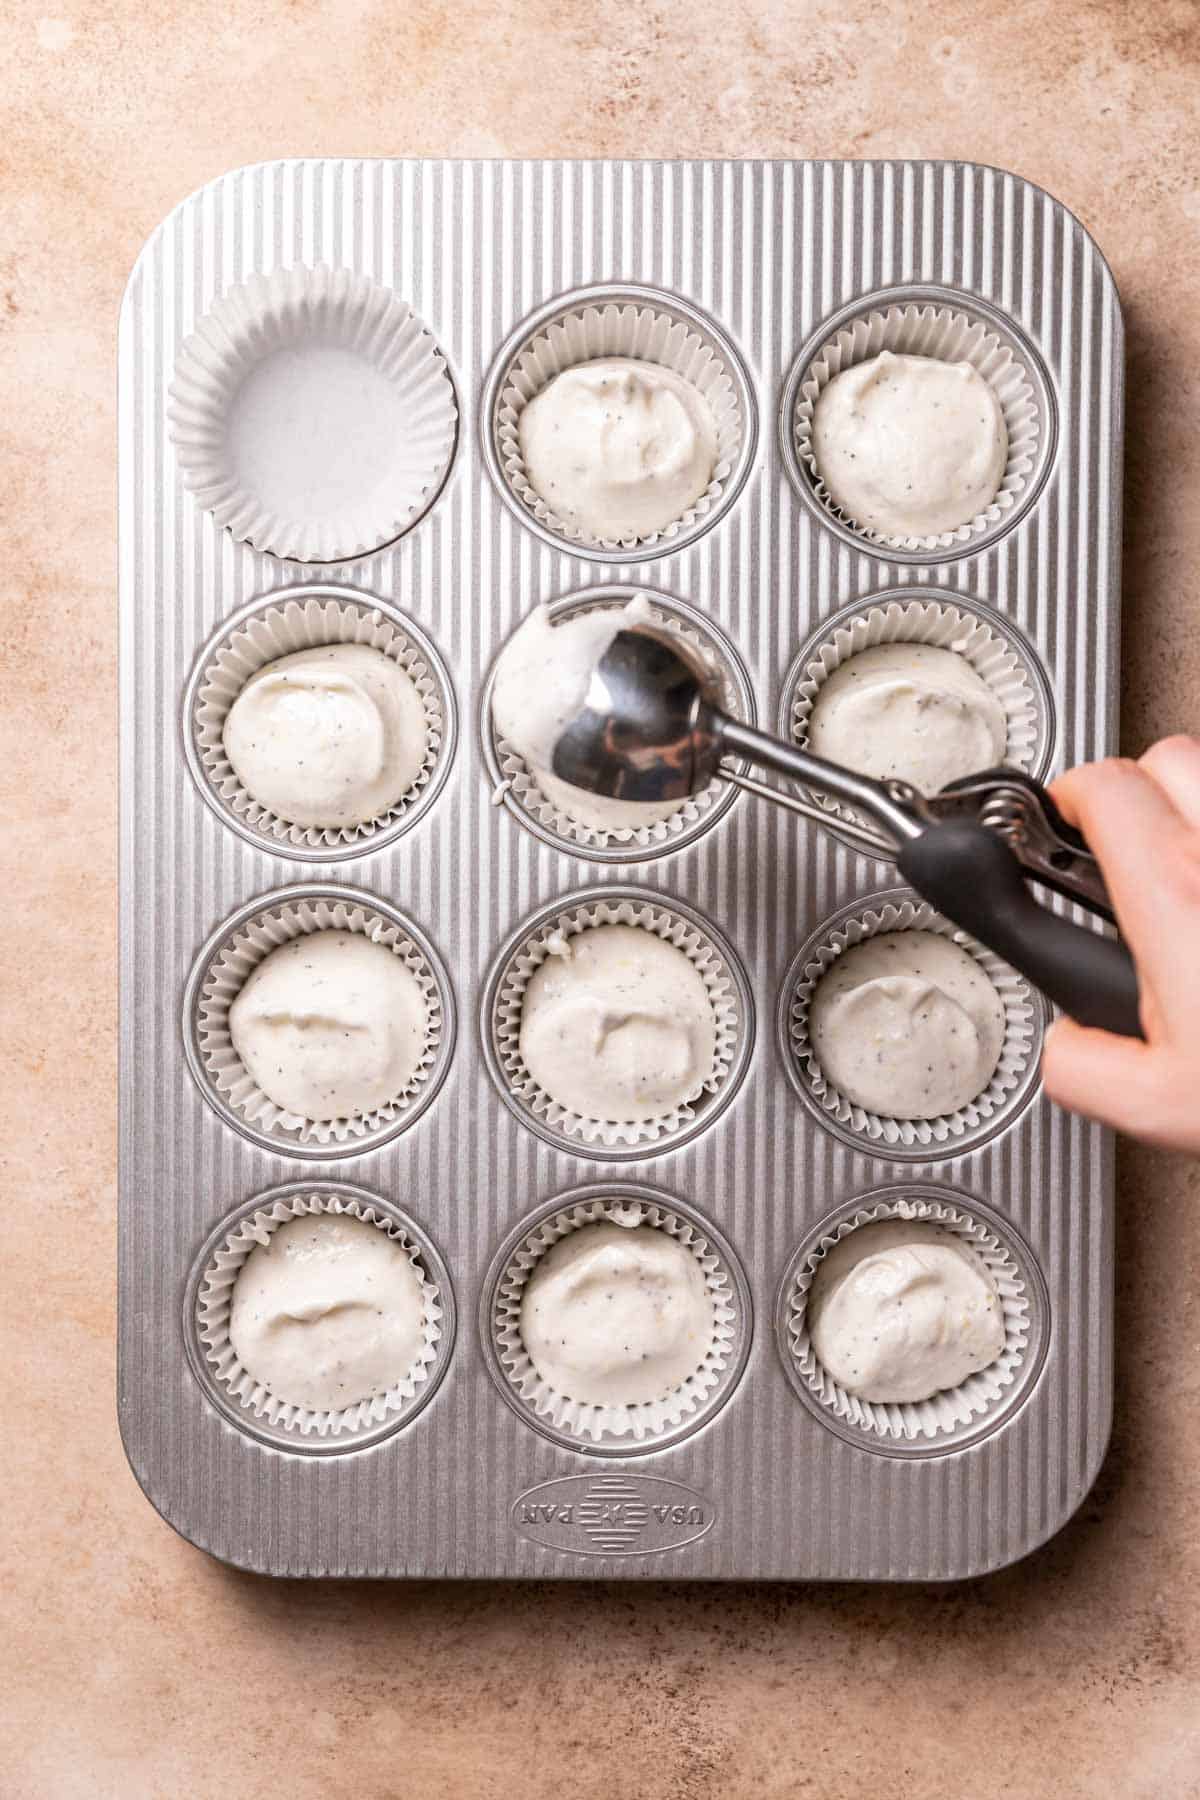 scooping cupcake batter into a lined cupcake tin.